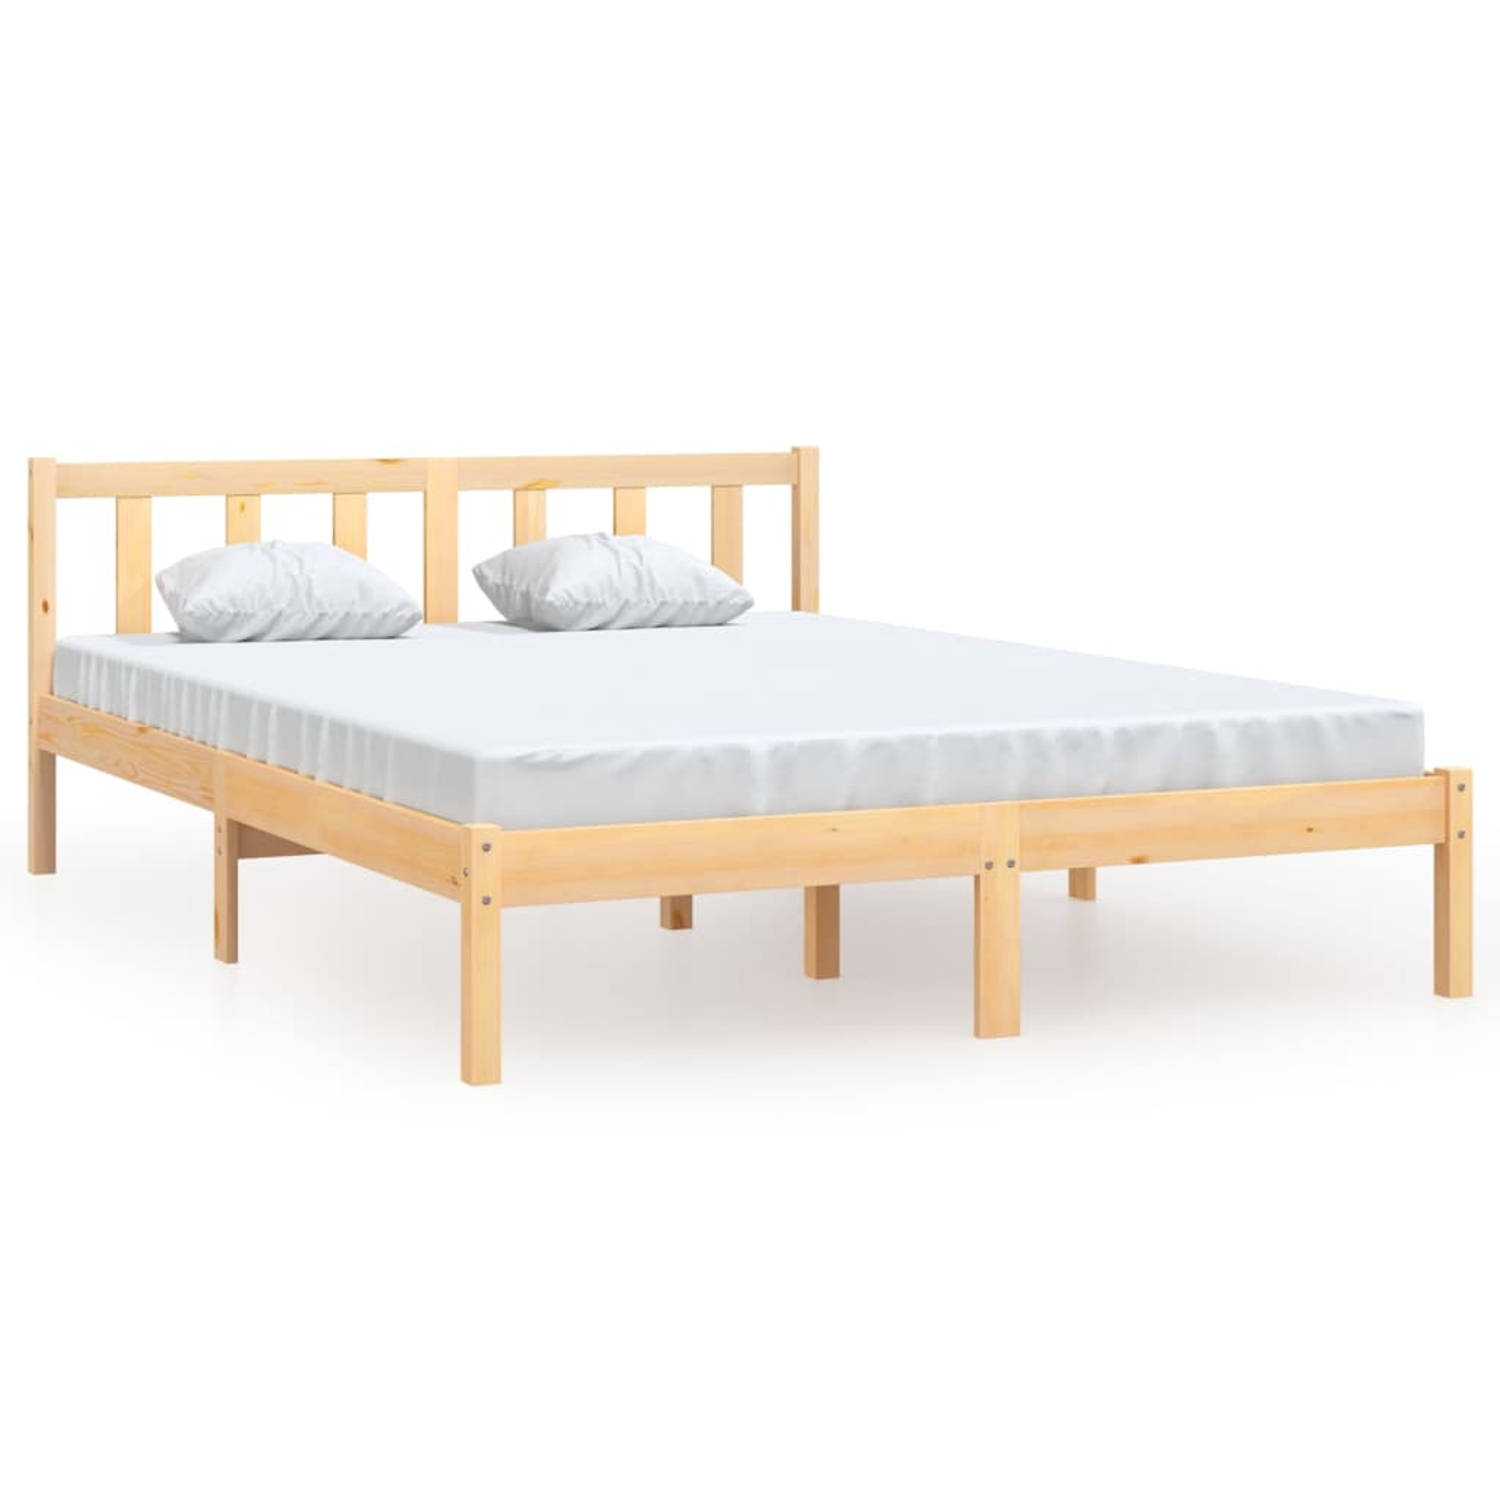 The Living Store Bedframe massief grenenhout 120x200 cm - Bedframe - Bedframe - Bed Frame - Bed Frames - Bed - Bedden - 1-persoonsbed - 1-persoonsbedden - Eenpersoons Bed